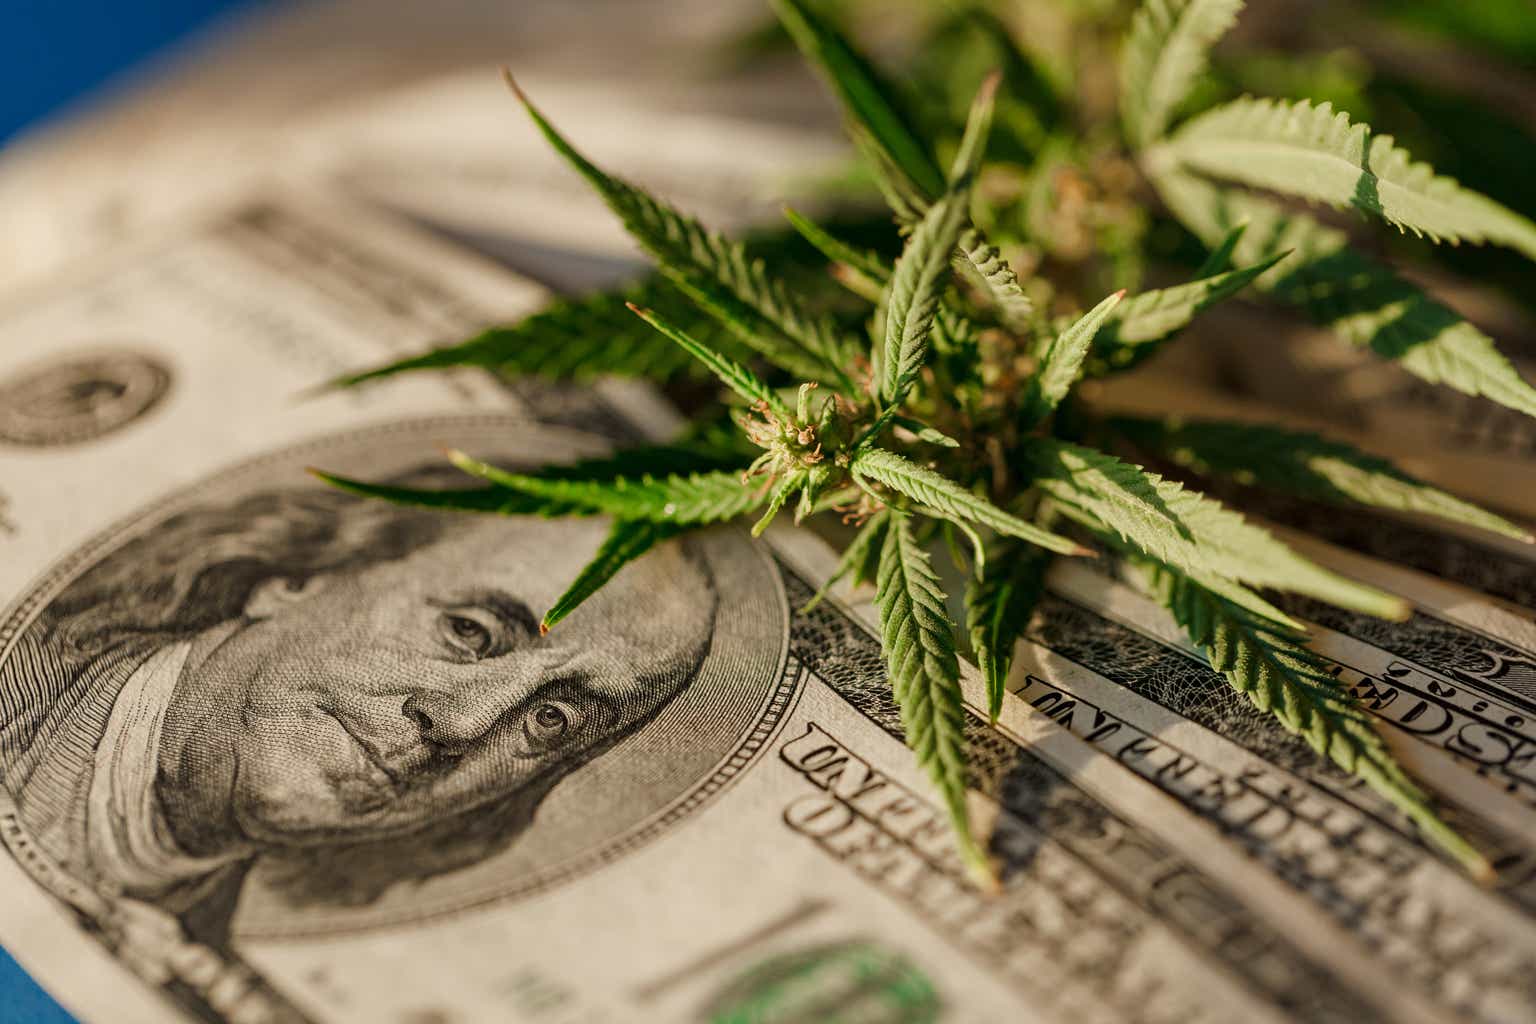 Aurora Cannabis Stock: Barely Surviving Or Soon To Be Thriving? (NASDAQ:ACB)